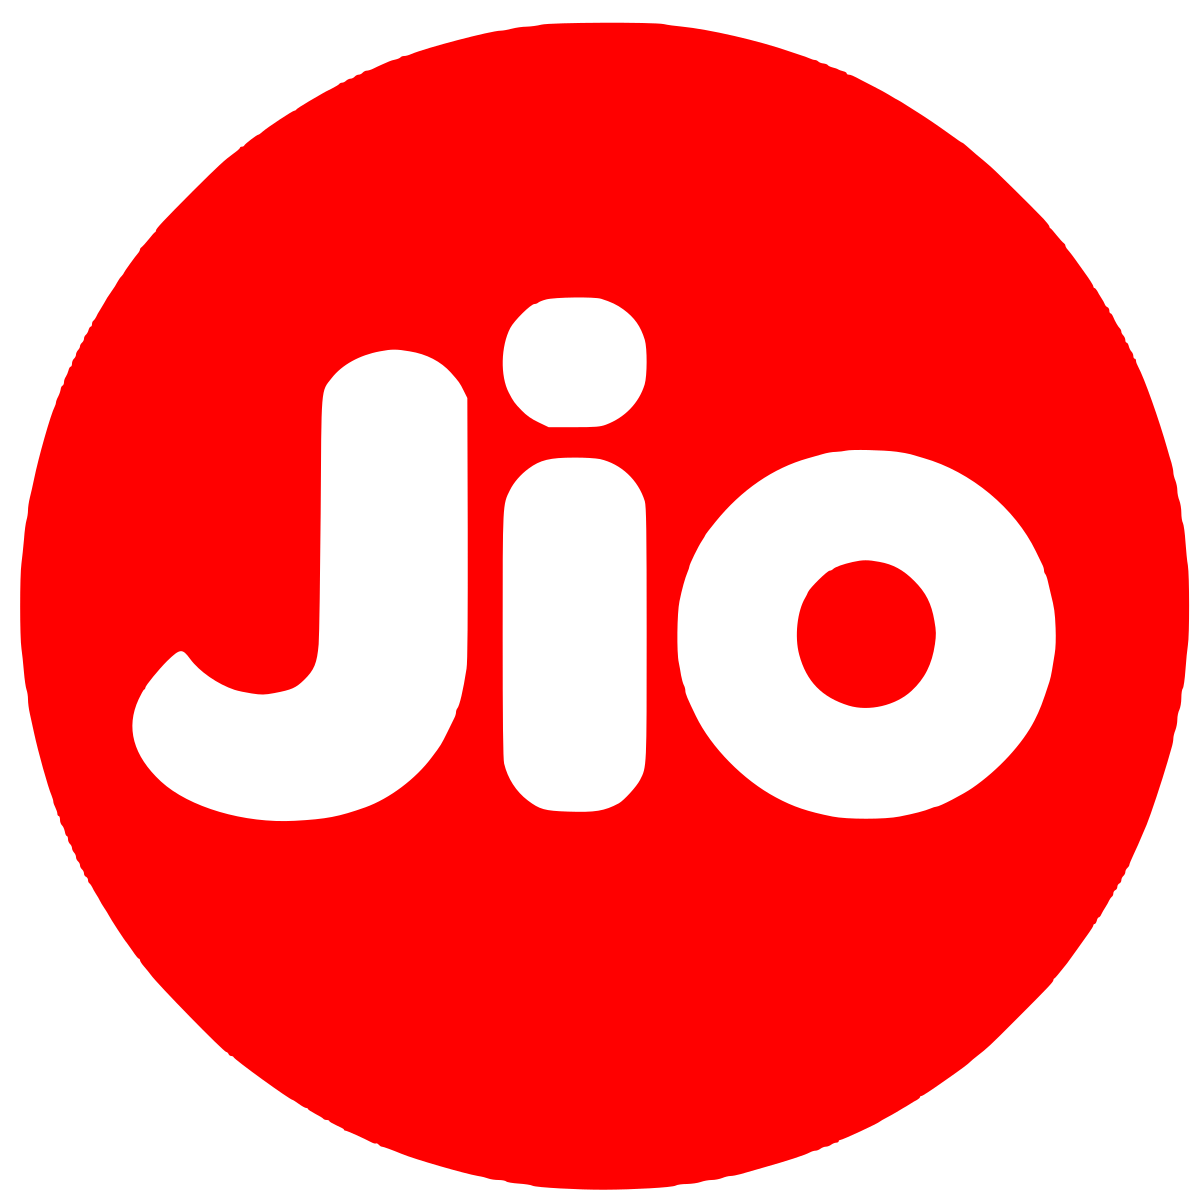 Amazon Pay Jio Recharge Loot- Rs.399 Recharge In Just Rs.99Amazon Pay Jio Recharge Loot- Rs.399 Recharge In Just Rs.99